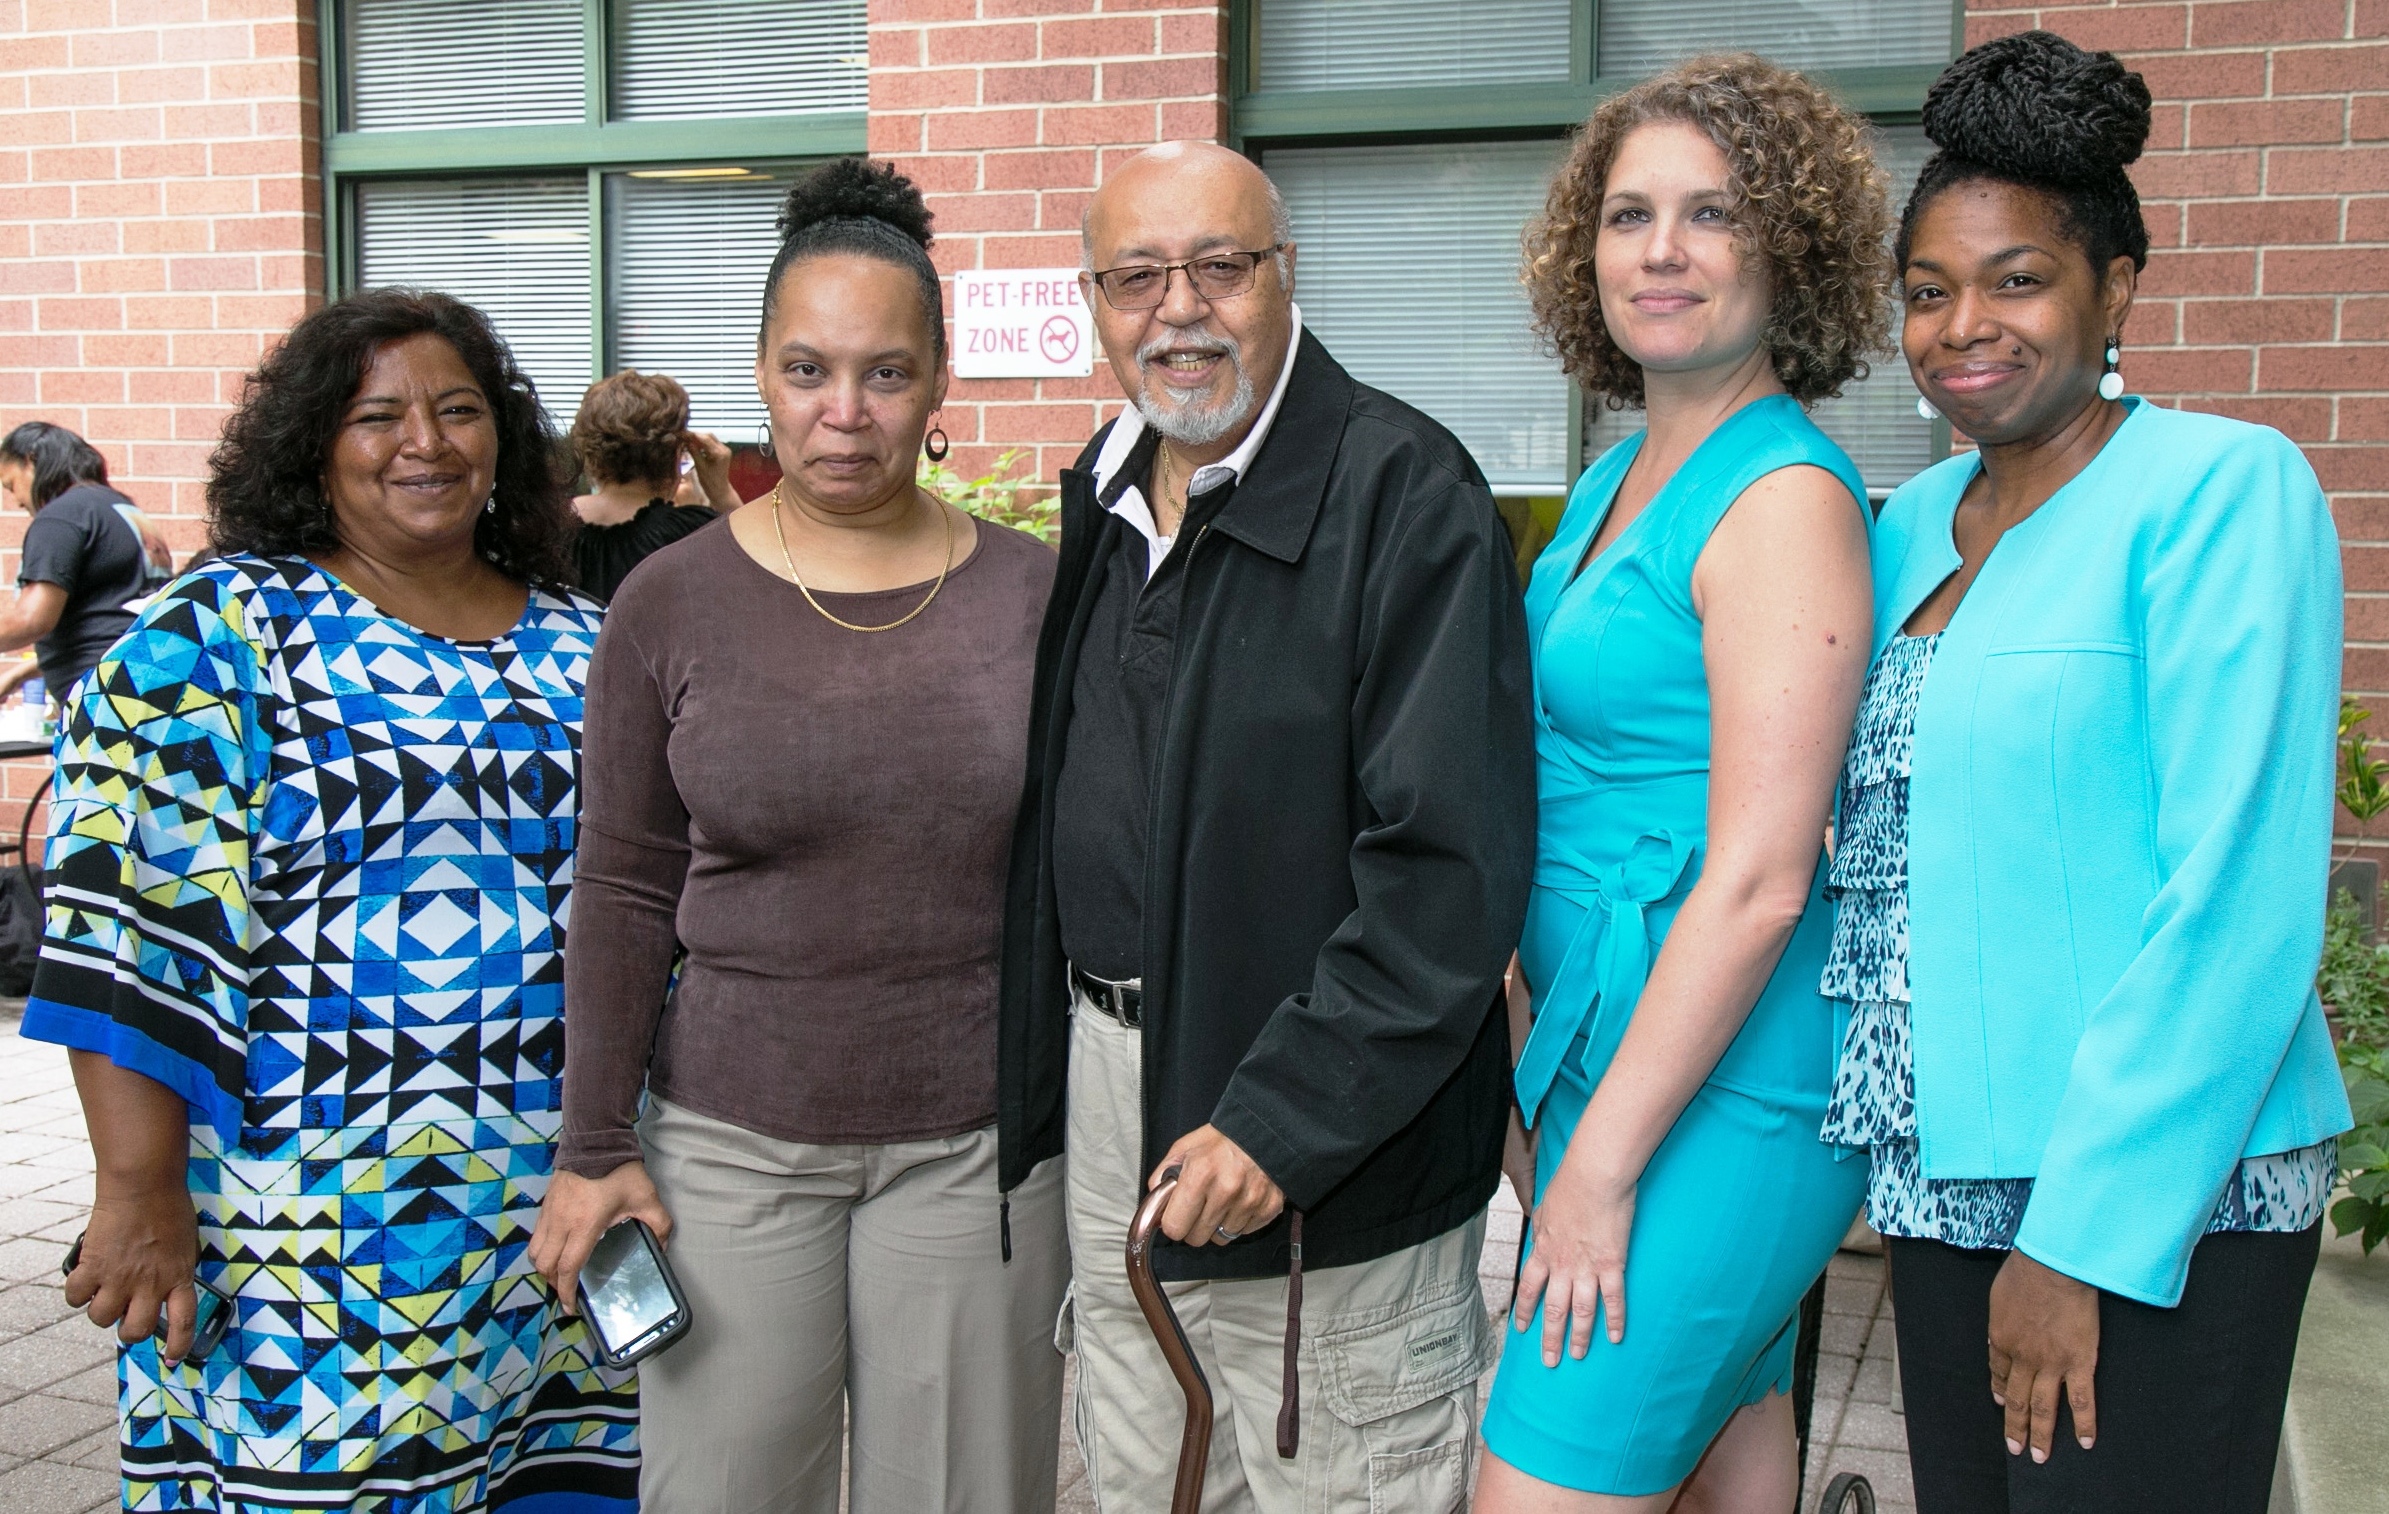 NYCHA staff at the open house